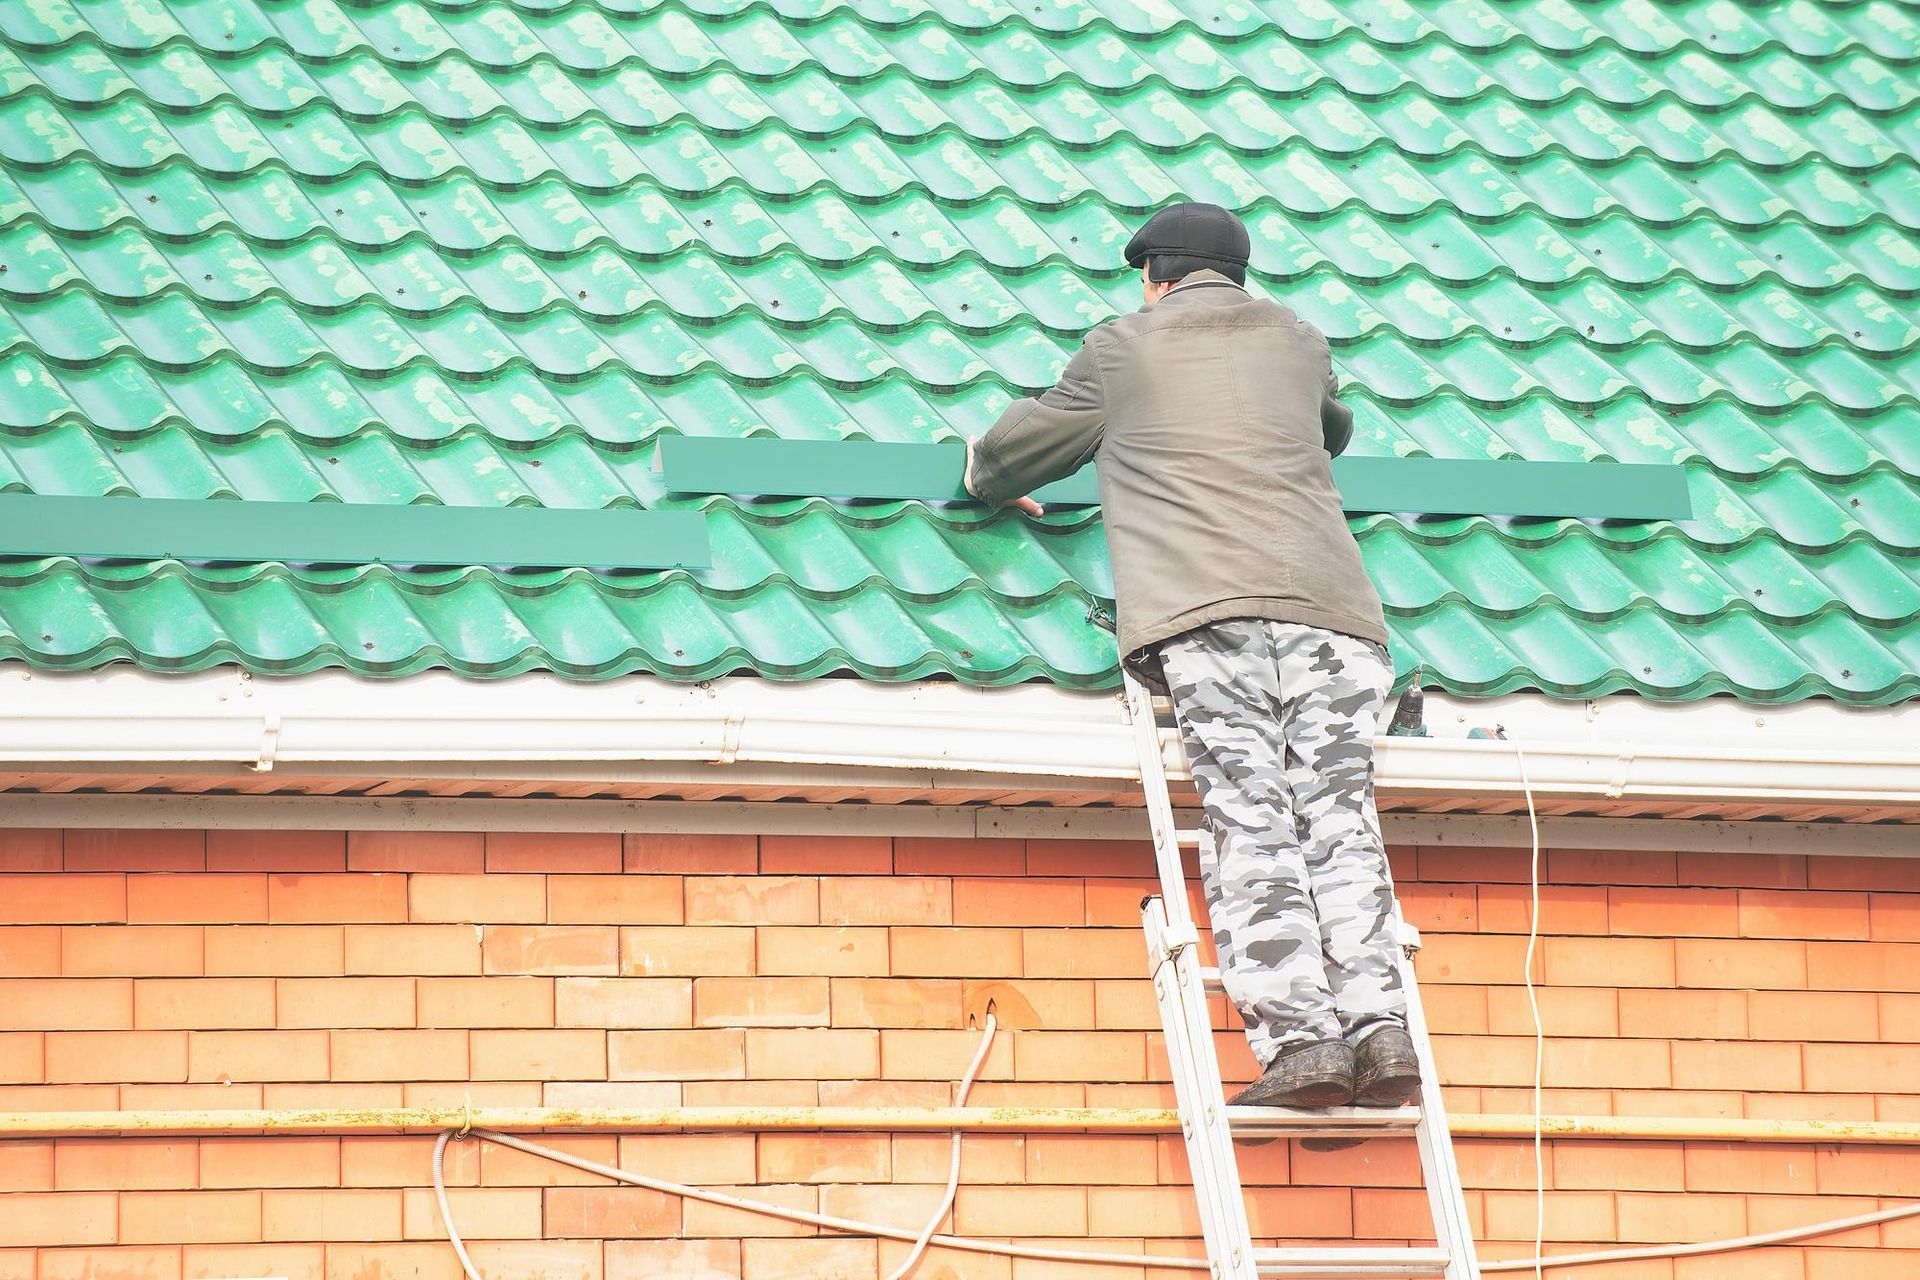 A man is standing on a ladder working on a green roof.